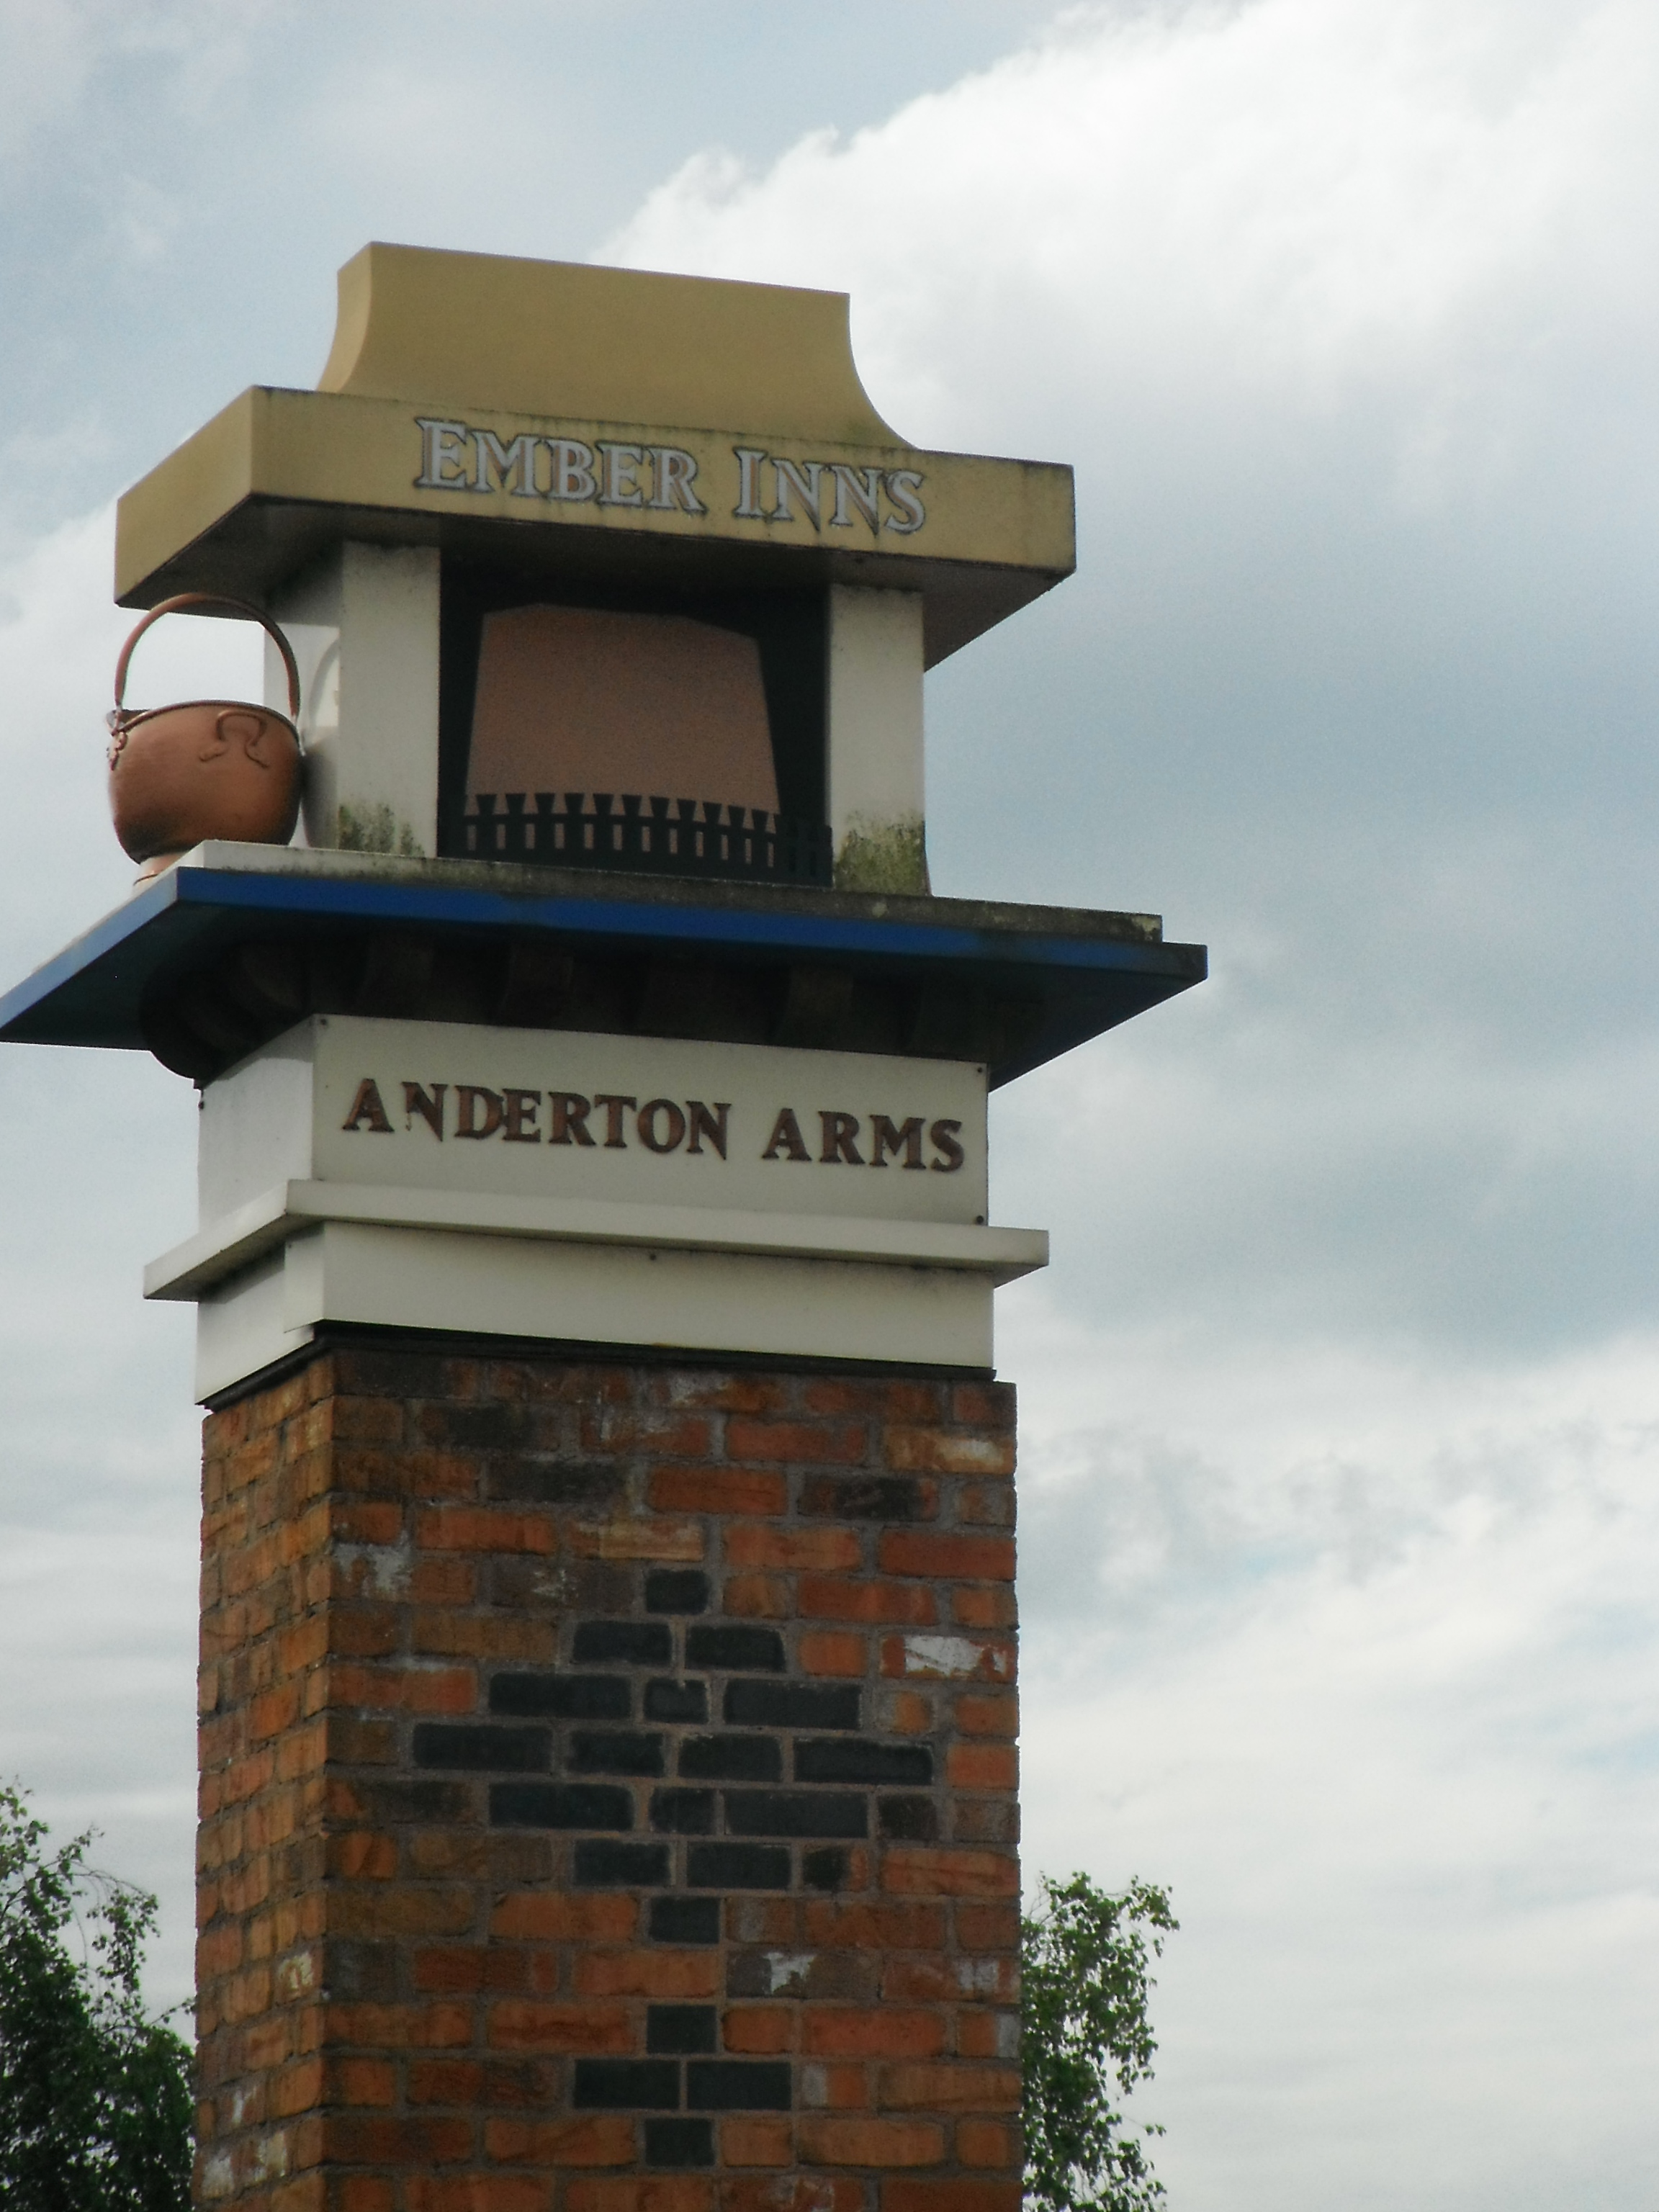 photo taken by me - the pub sign for The Anderton Arms, Fulwood, Preston